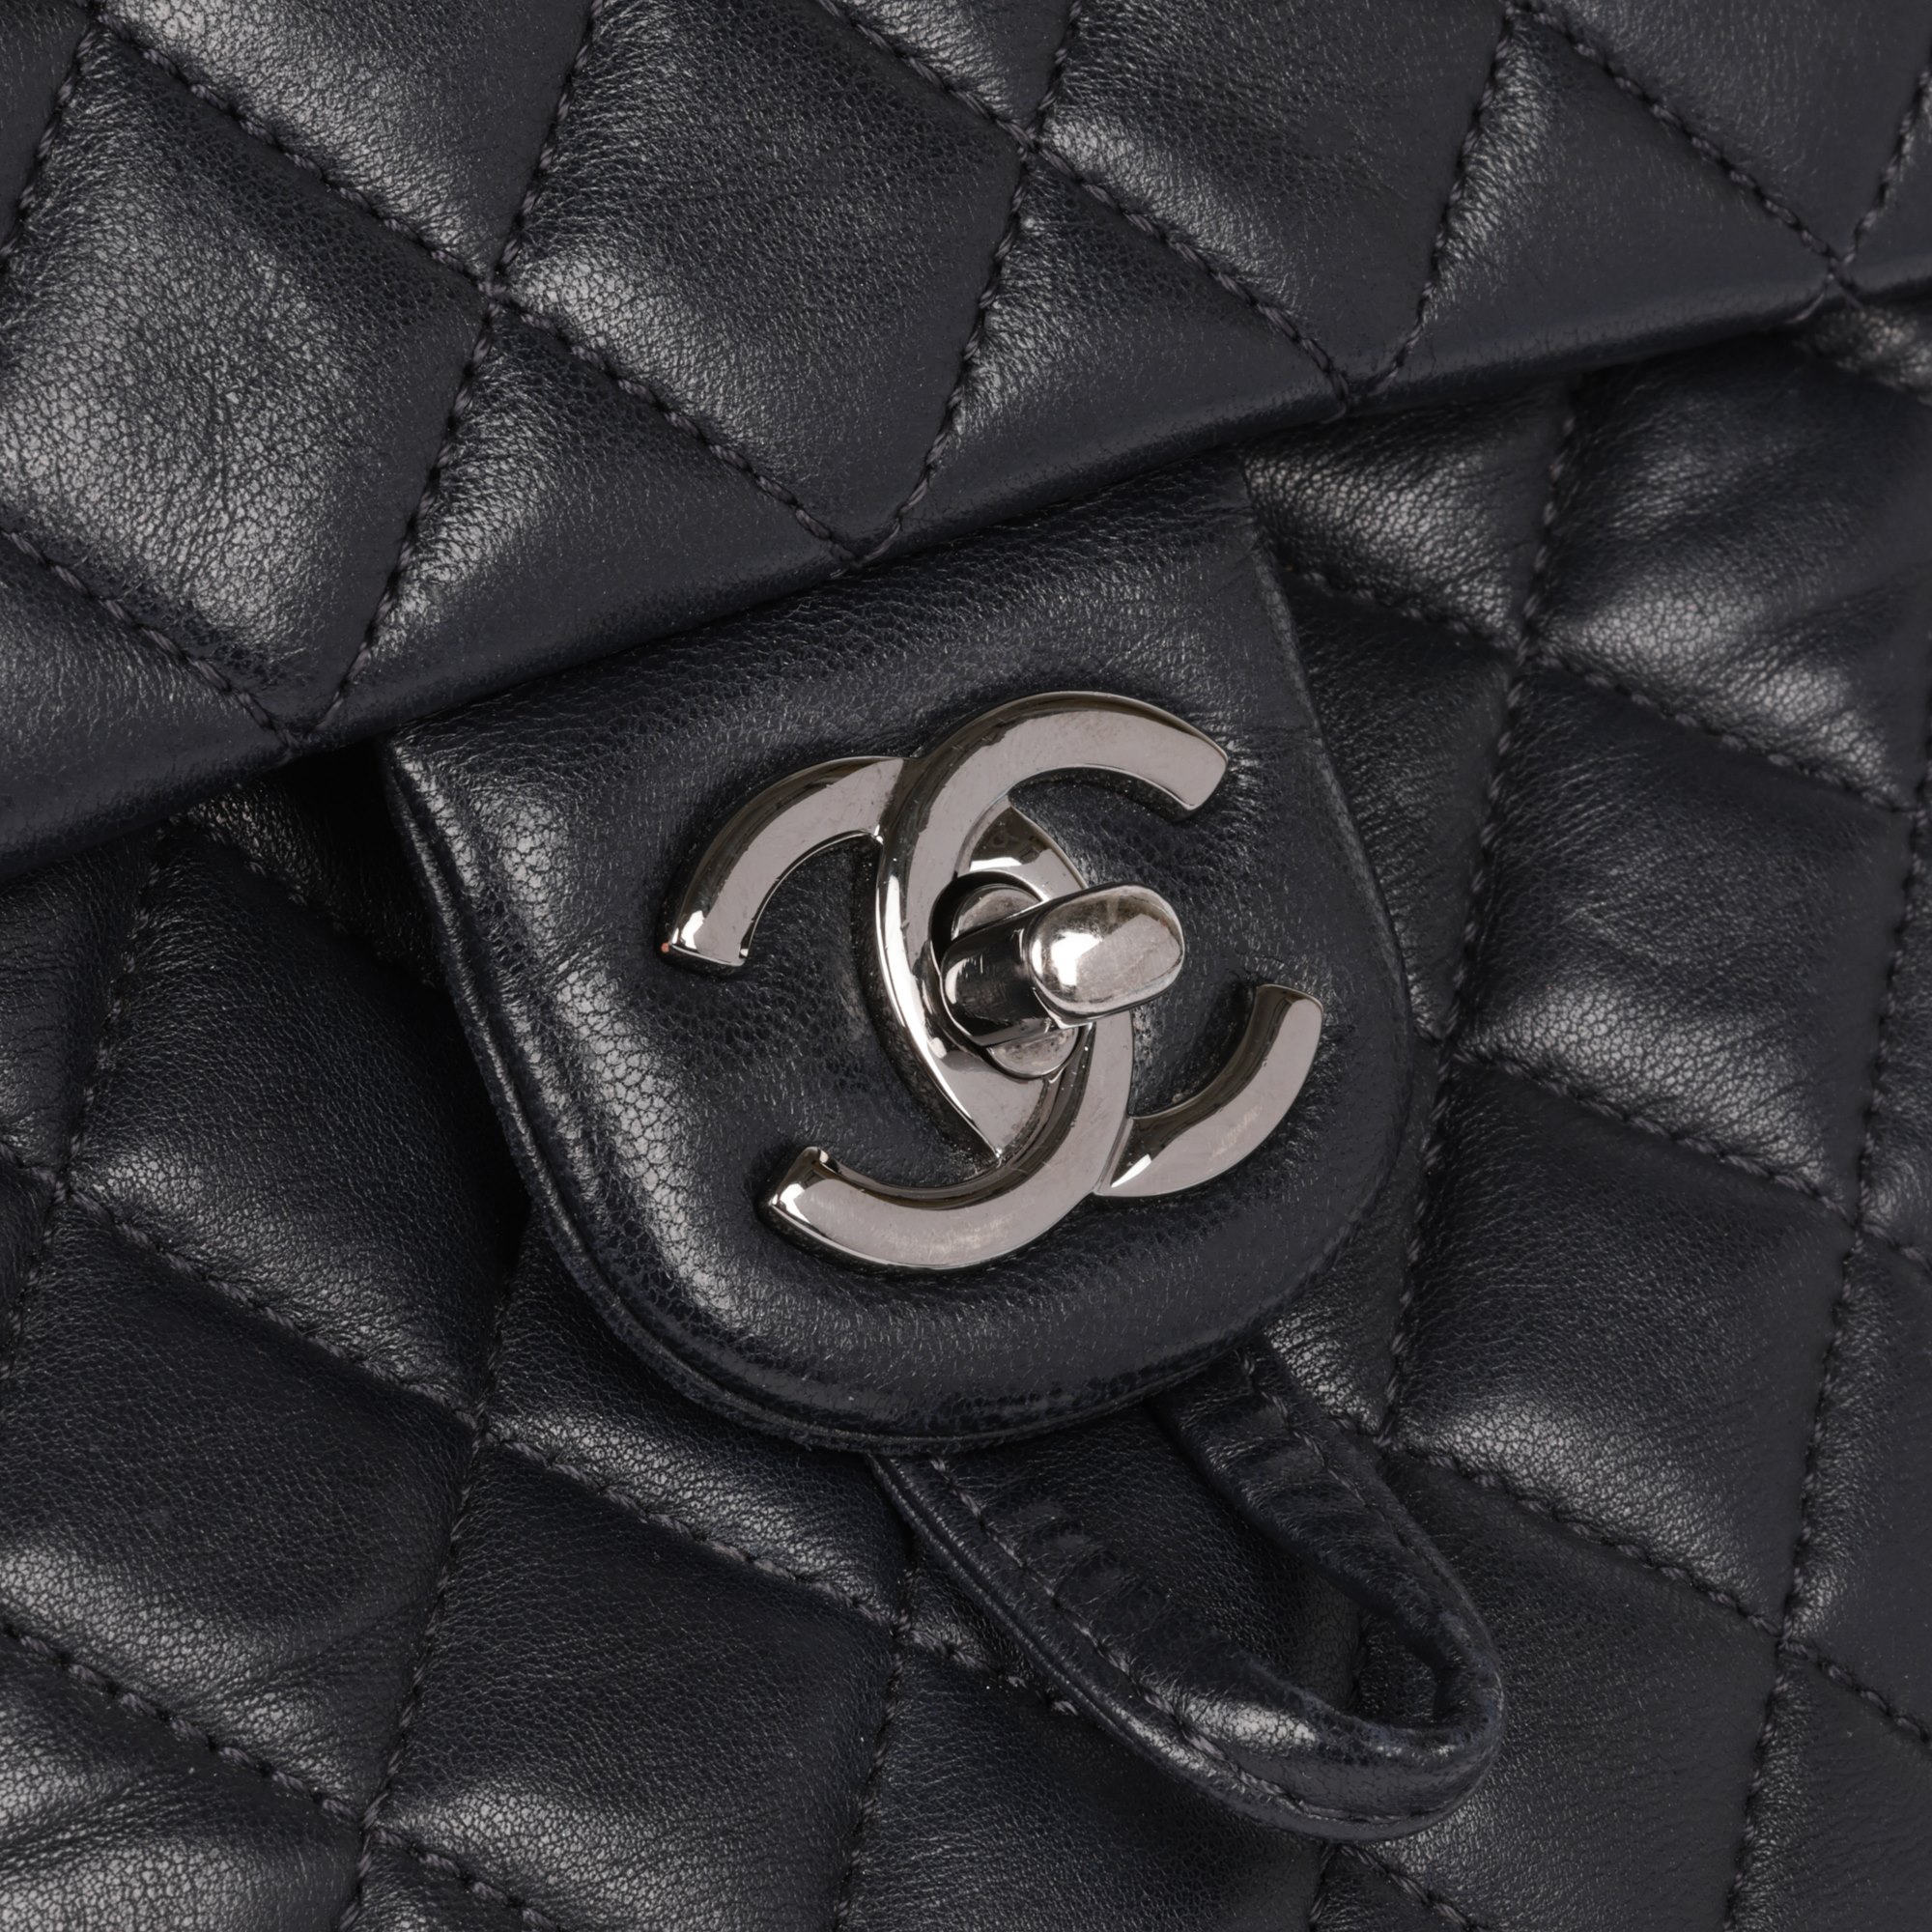 Chanel Indigo Quilted Lambskin Small Urban Spirit Backpack